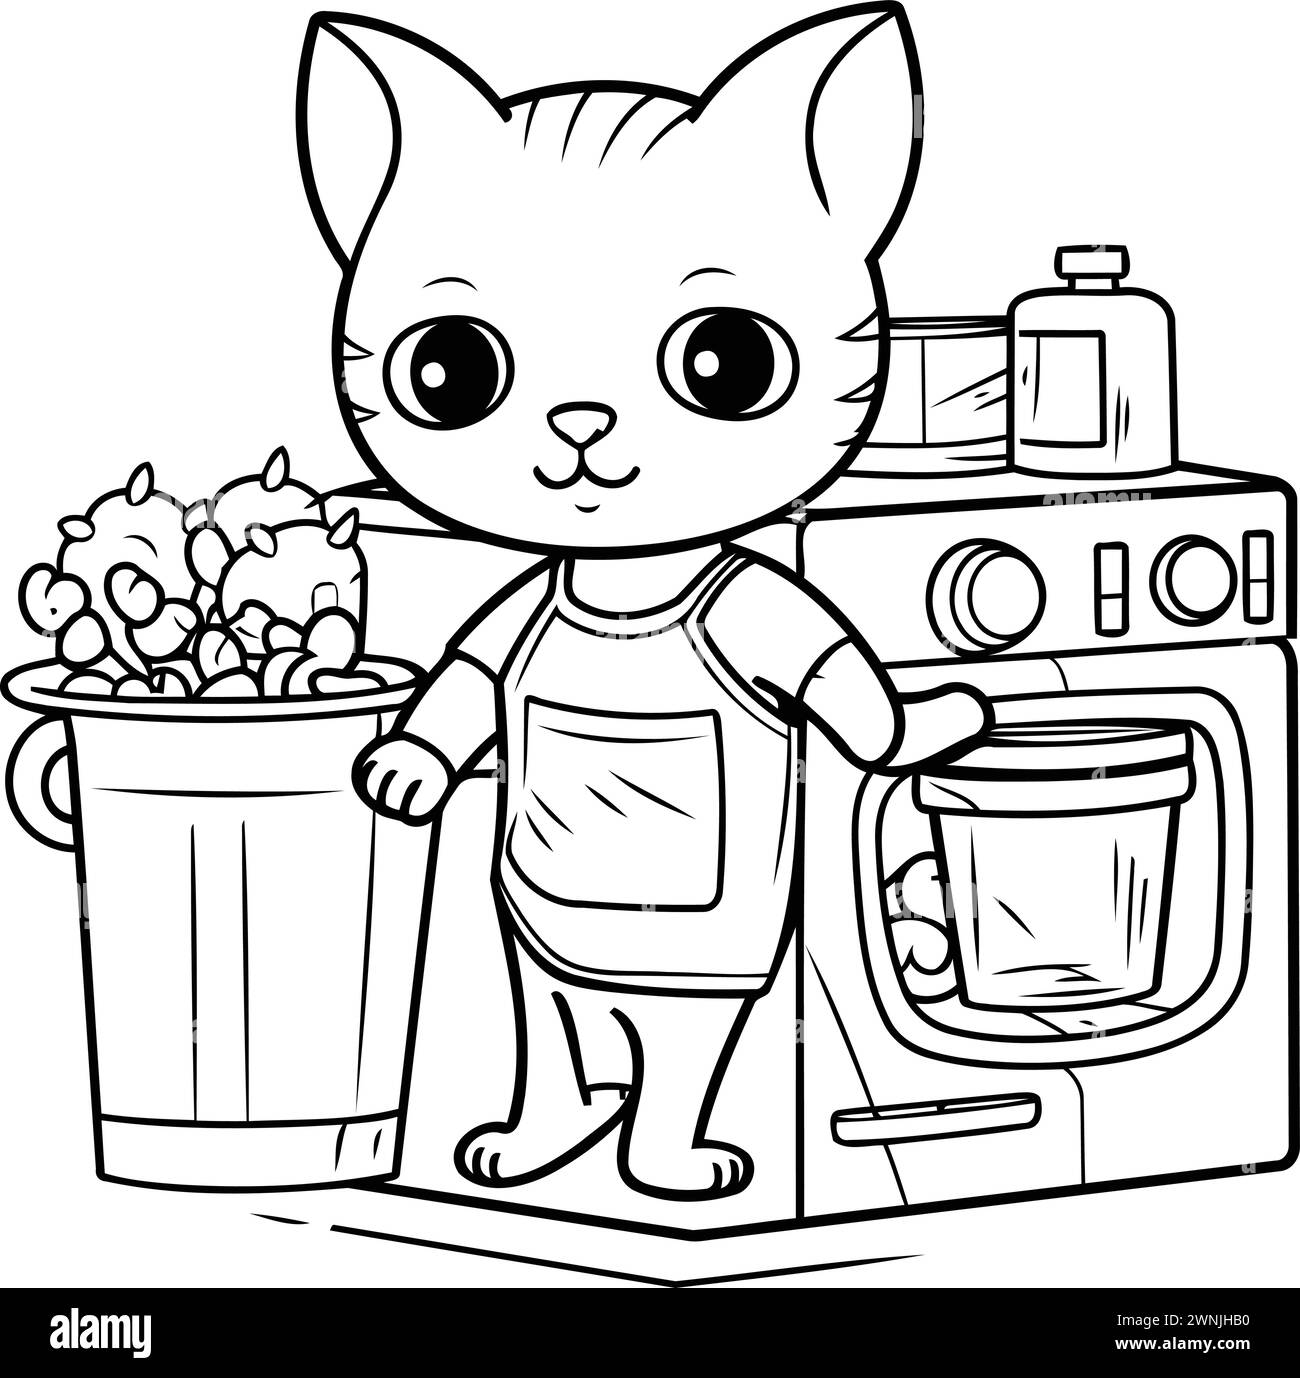 Black and White Cartoon Illustration of Cat with Laundry Equipment for Coloring Book Stock Vector